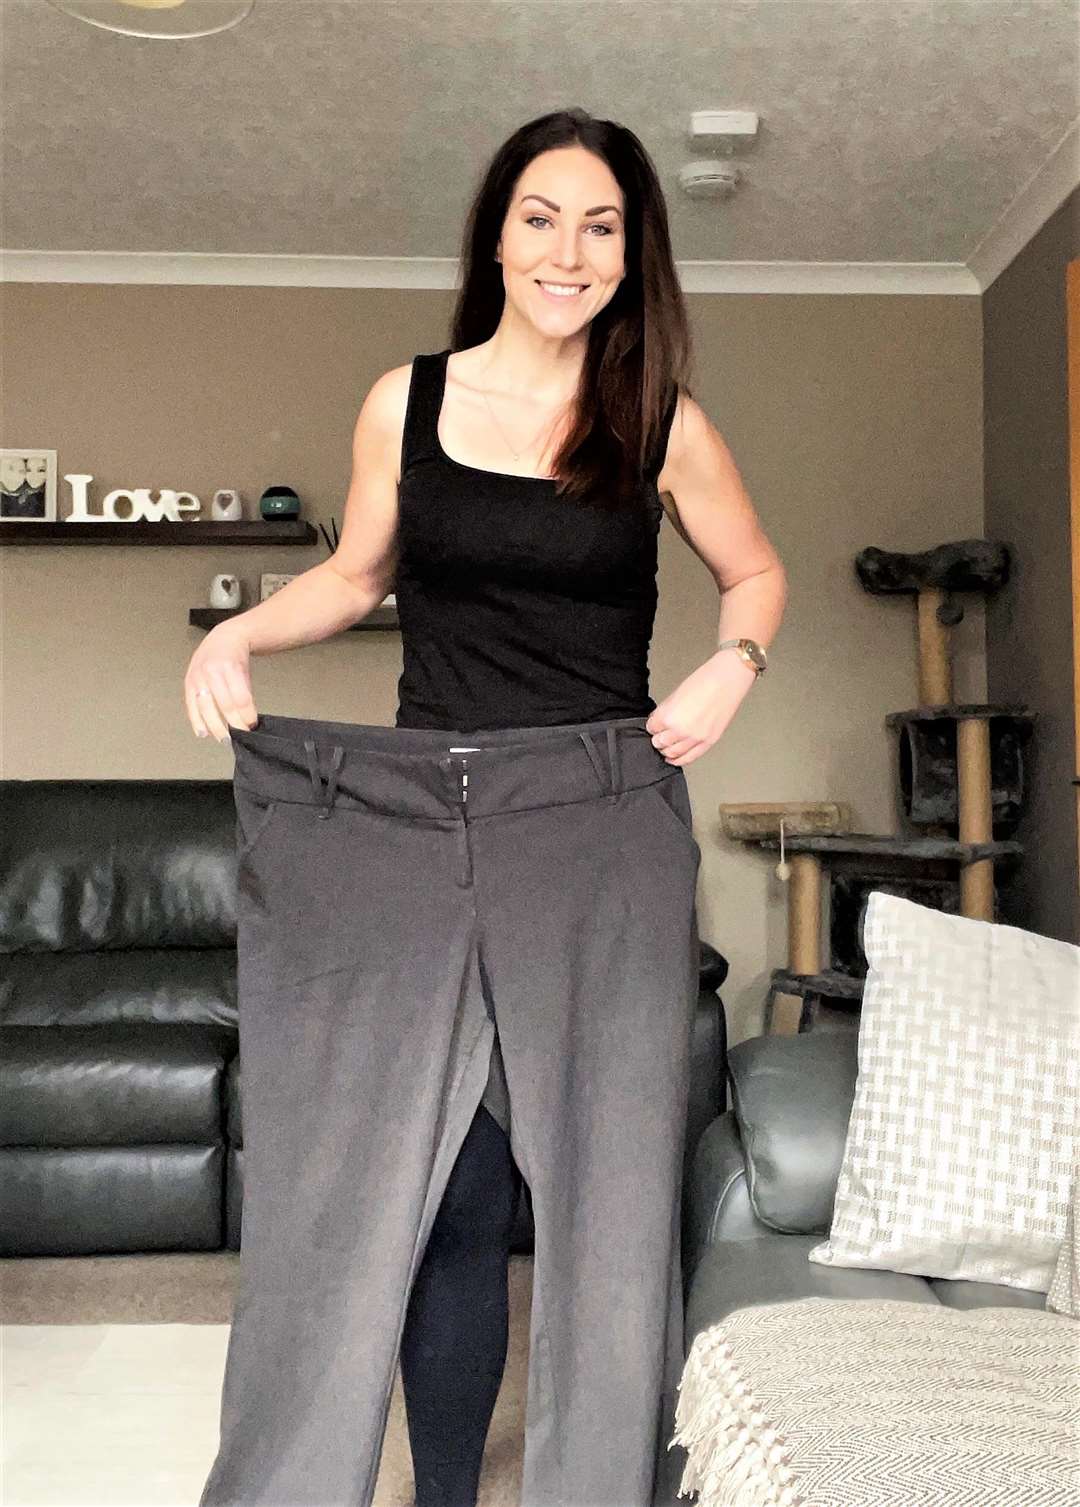 Danielle Dunstall has gone from a size 22 to size 10.